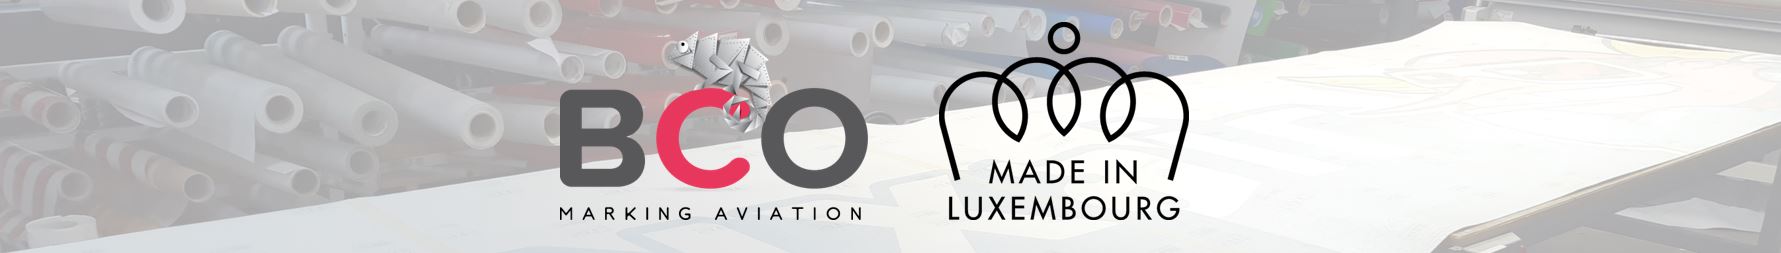 Banner Made in Luxembourg BCO Aviation vinyls and stickers (for all pages)